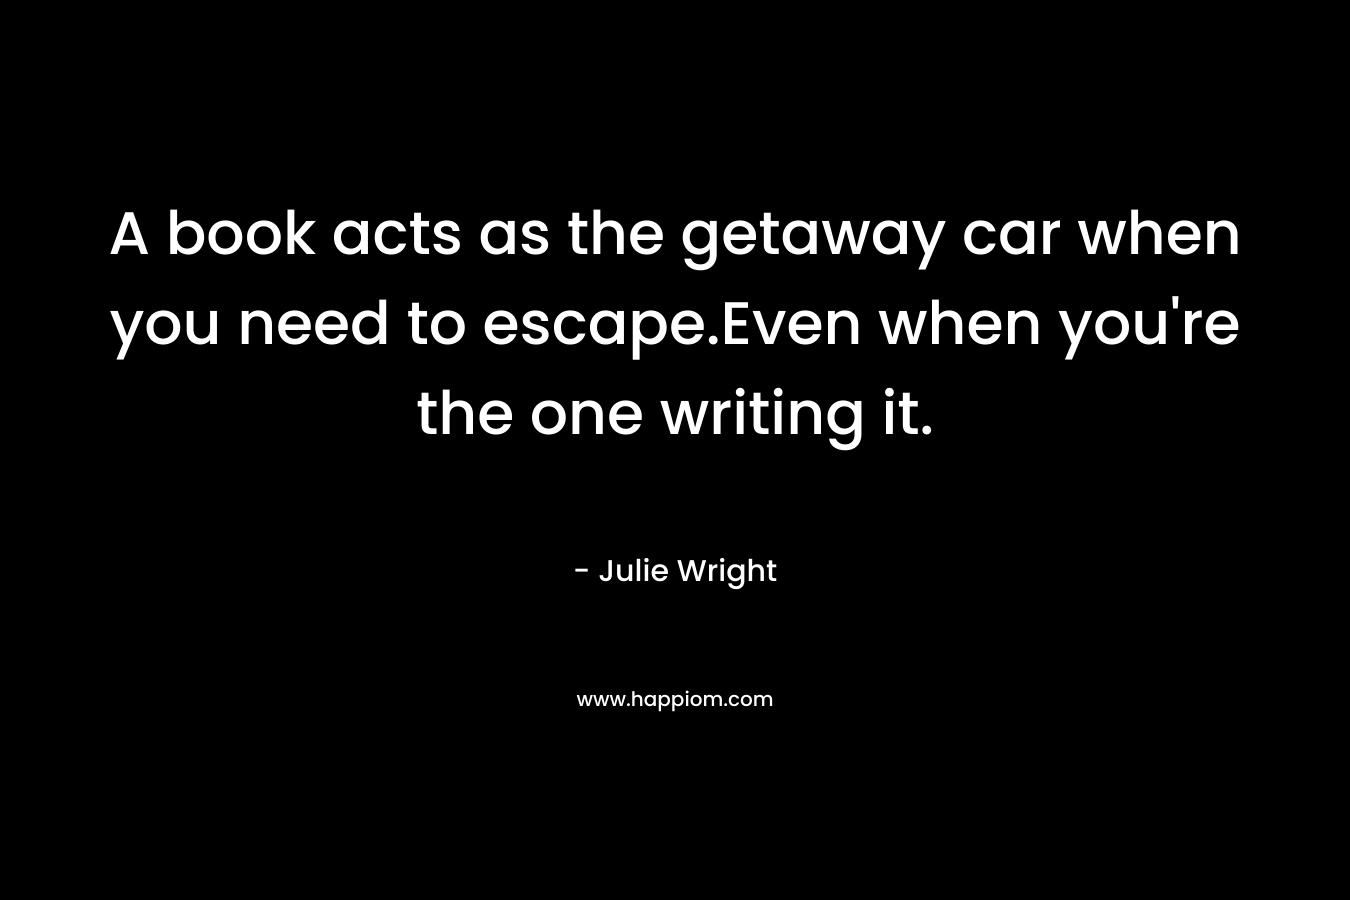 A book acts as the getaway car when you need to escape.Even when you're the one writing it.